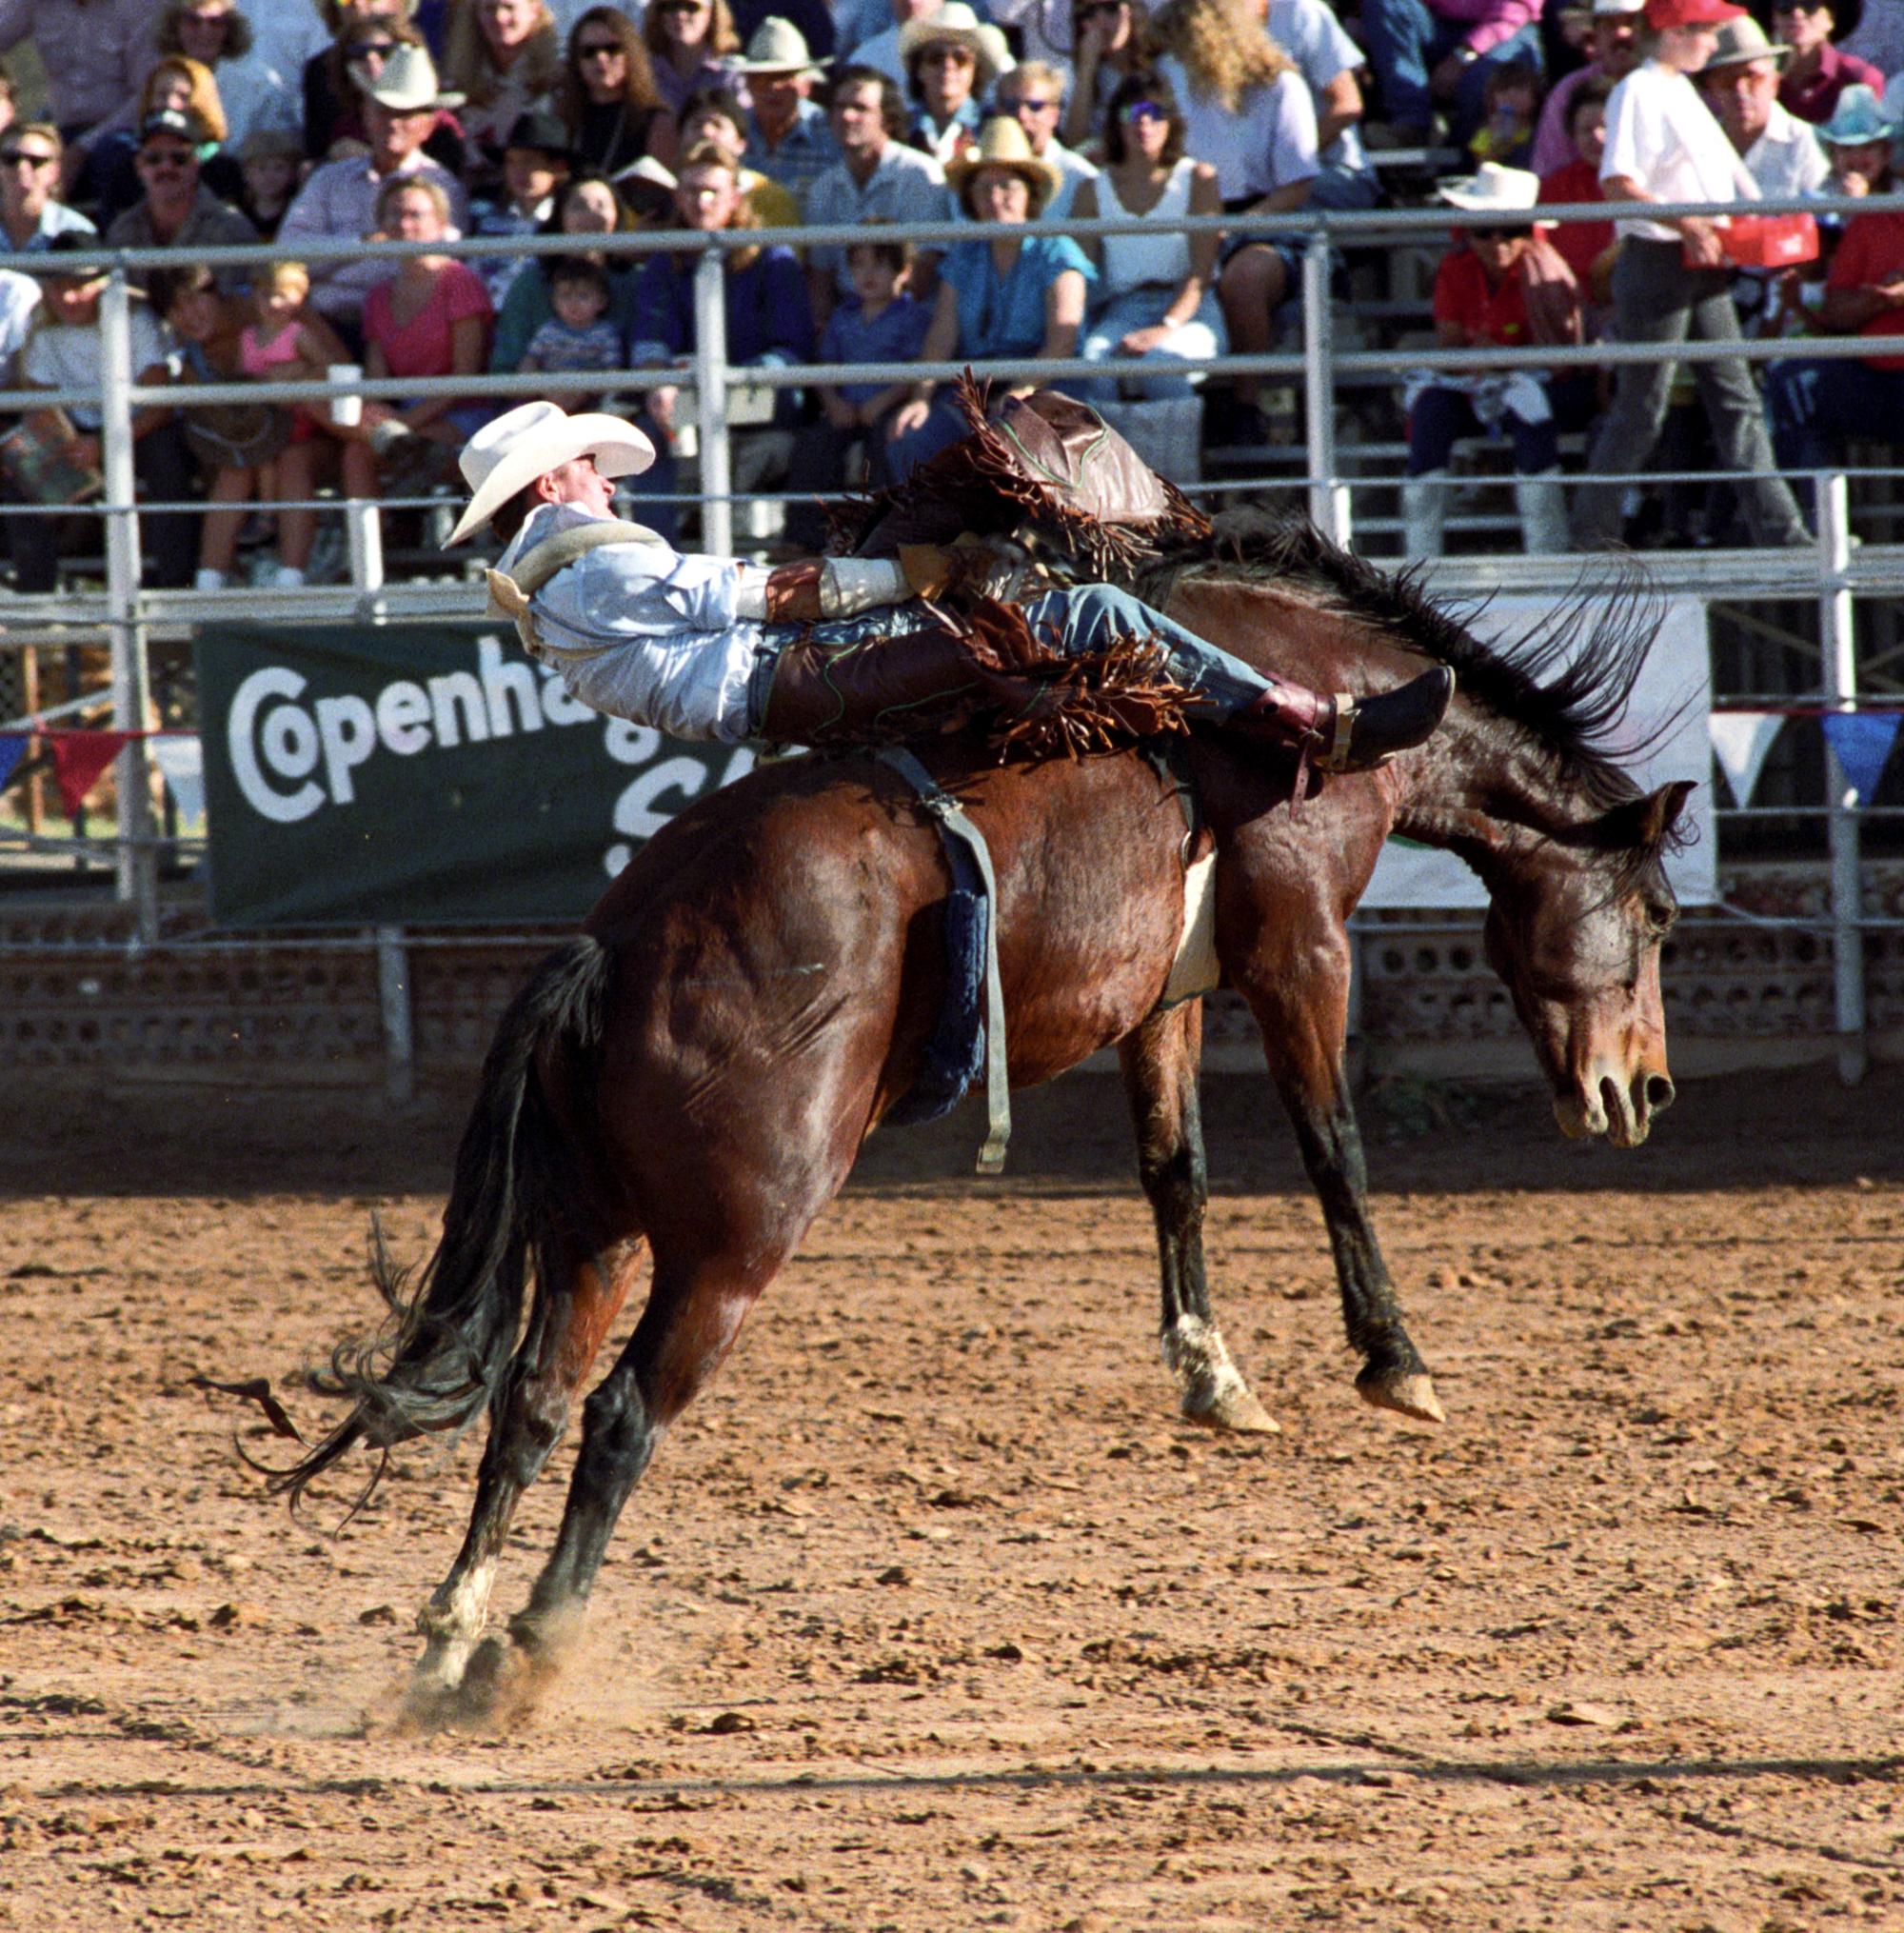 Imperial Valley Rodeo (1992) - Saddle Bronc #16